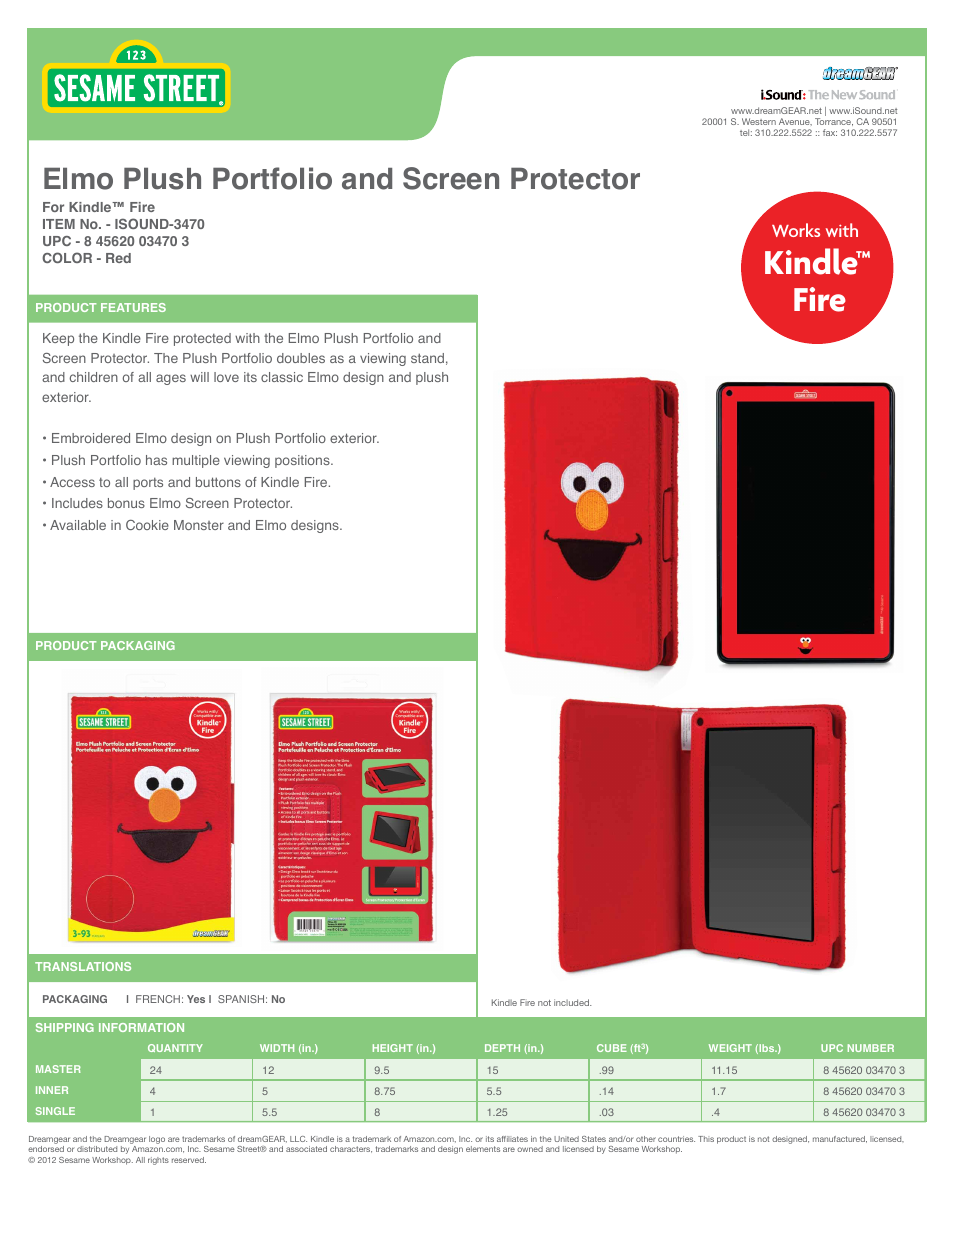 Elmo Plush Portfolio and Screen Protector for Kindle Fire - Sell Sheet